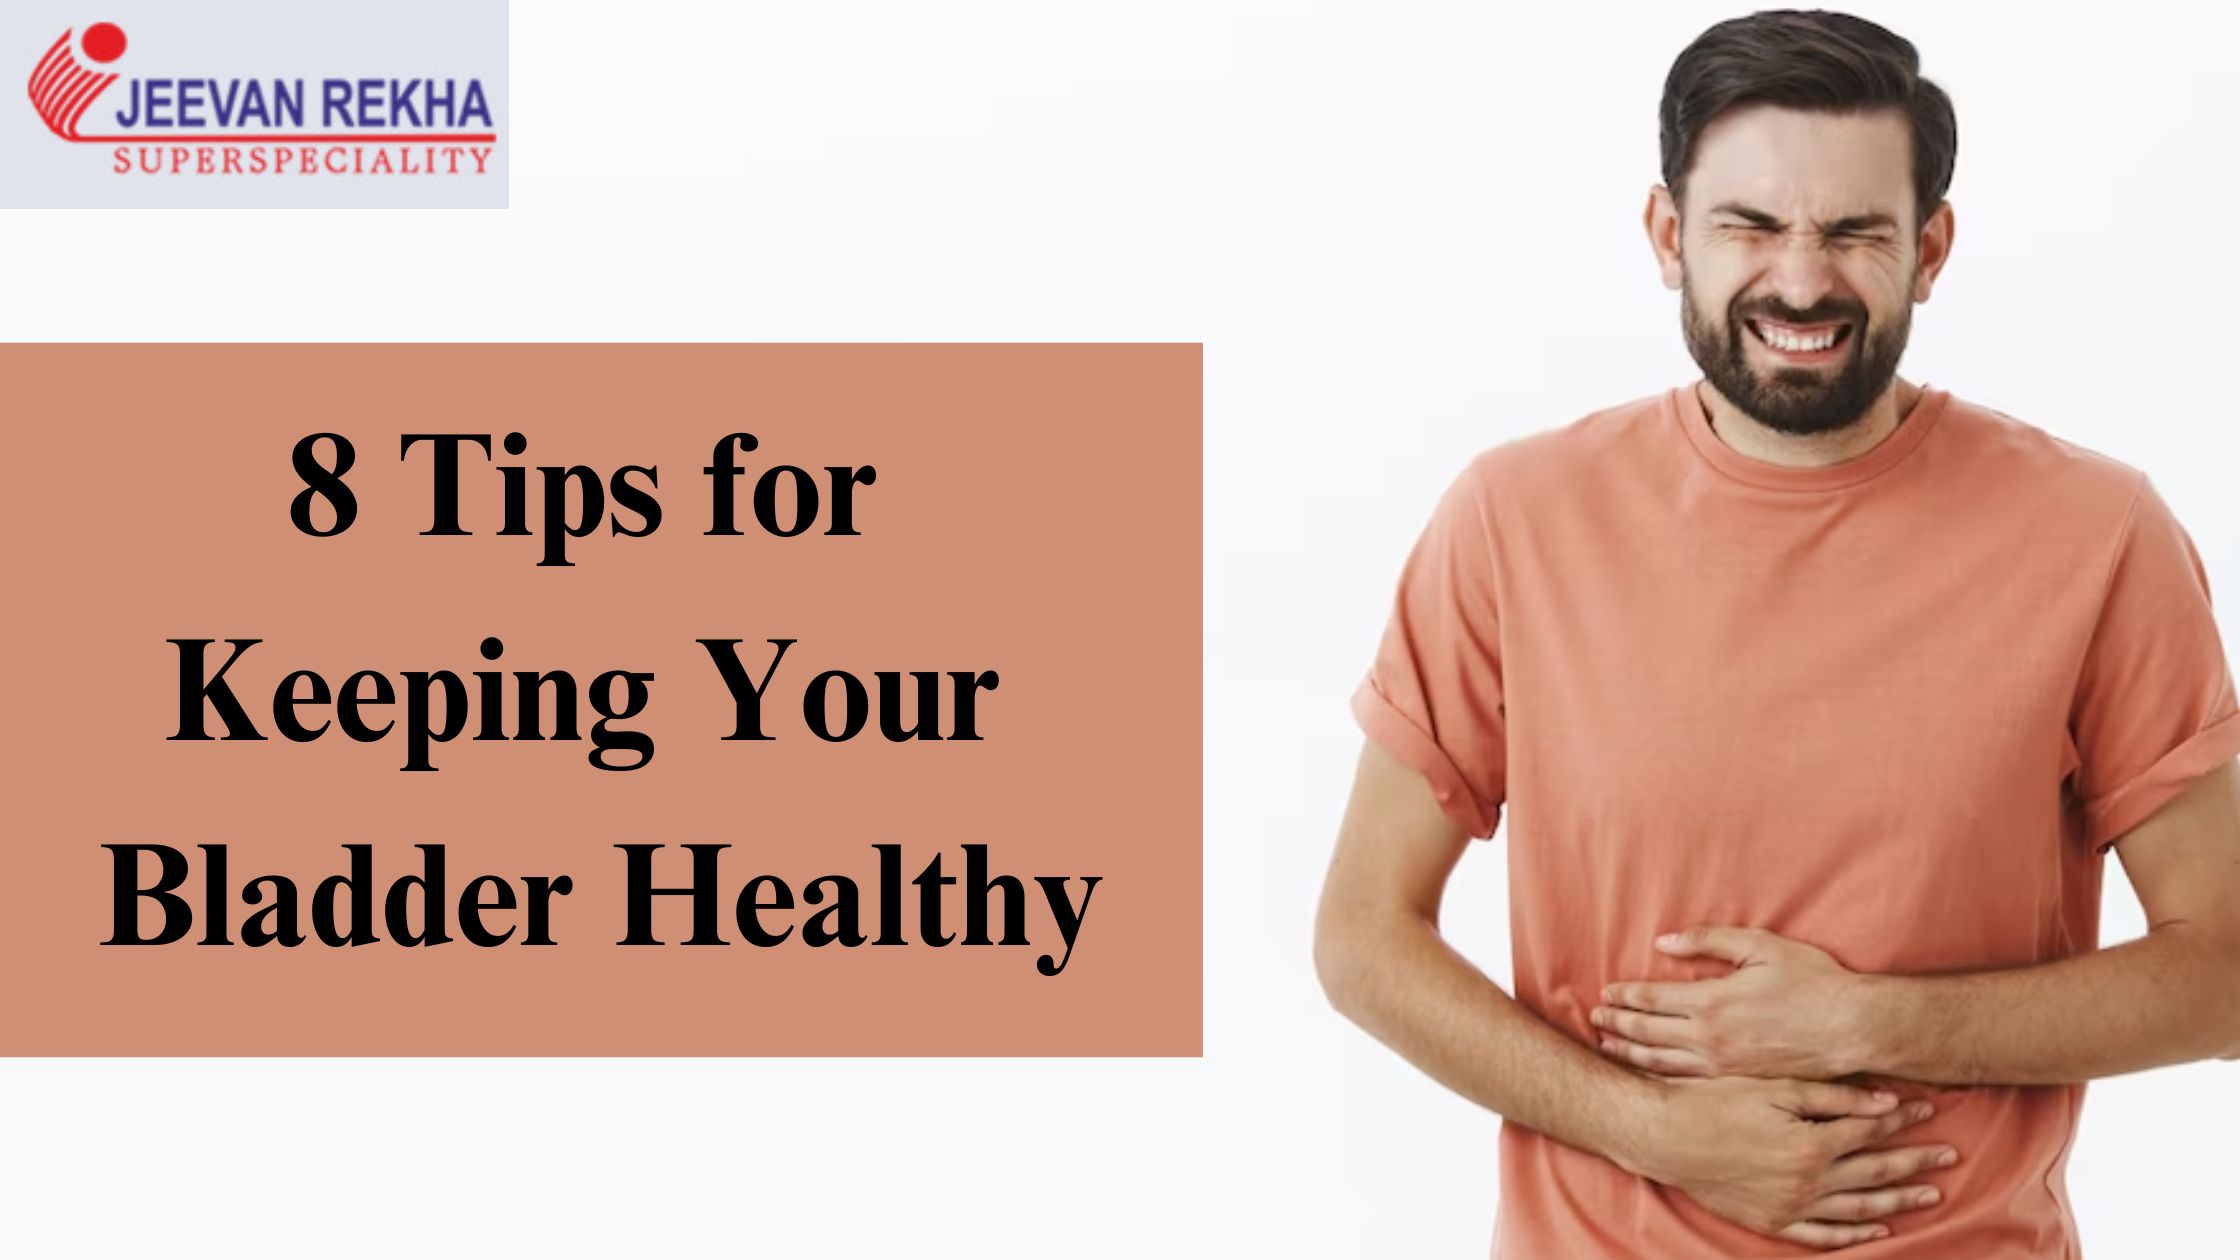 8 Tips for Keeping Your Bladder Healthy